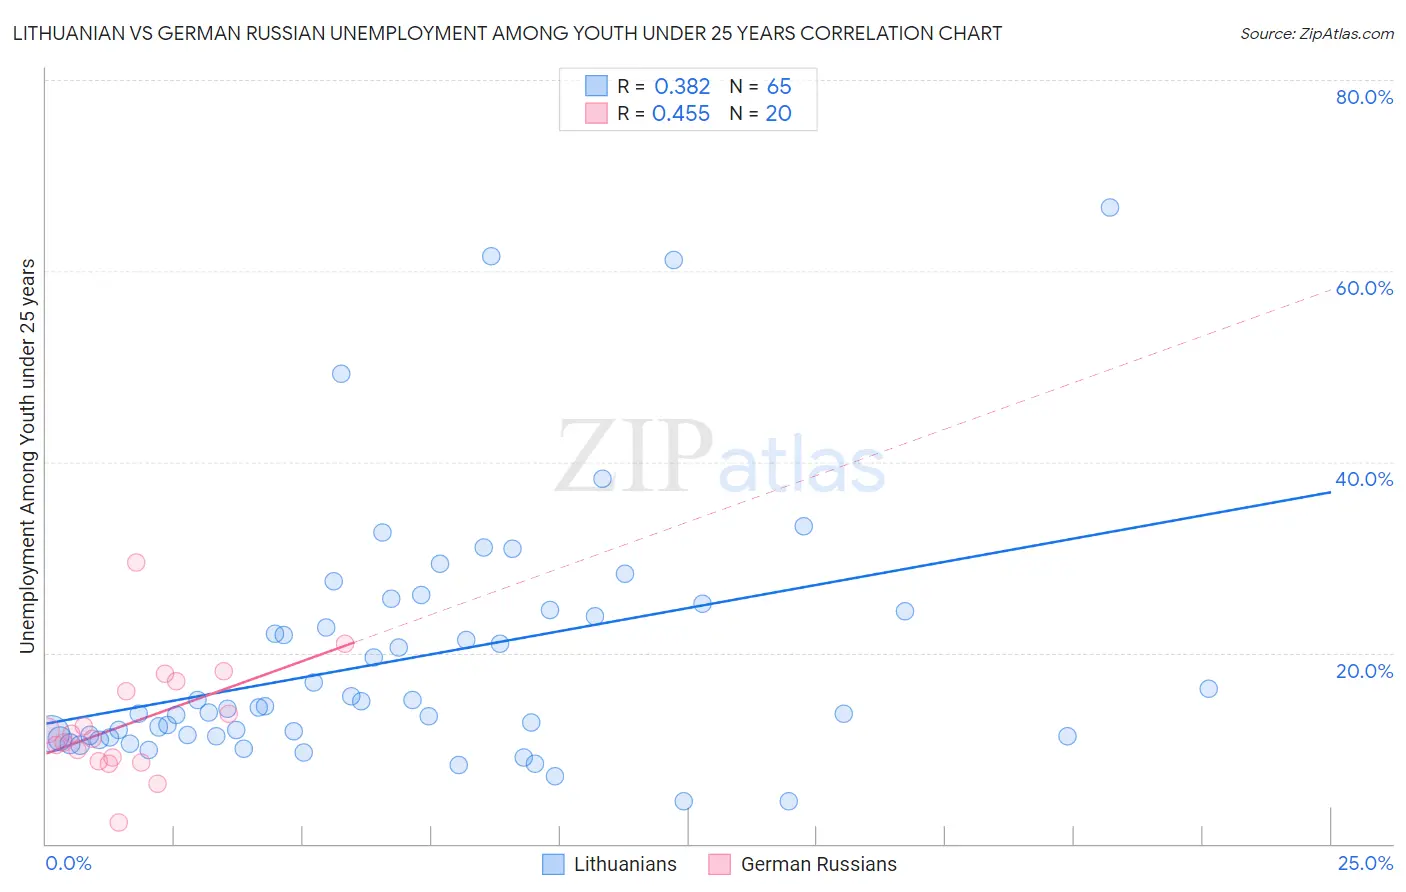 Lithuanian vs German Russian Unemployment Among Youth under 25 years